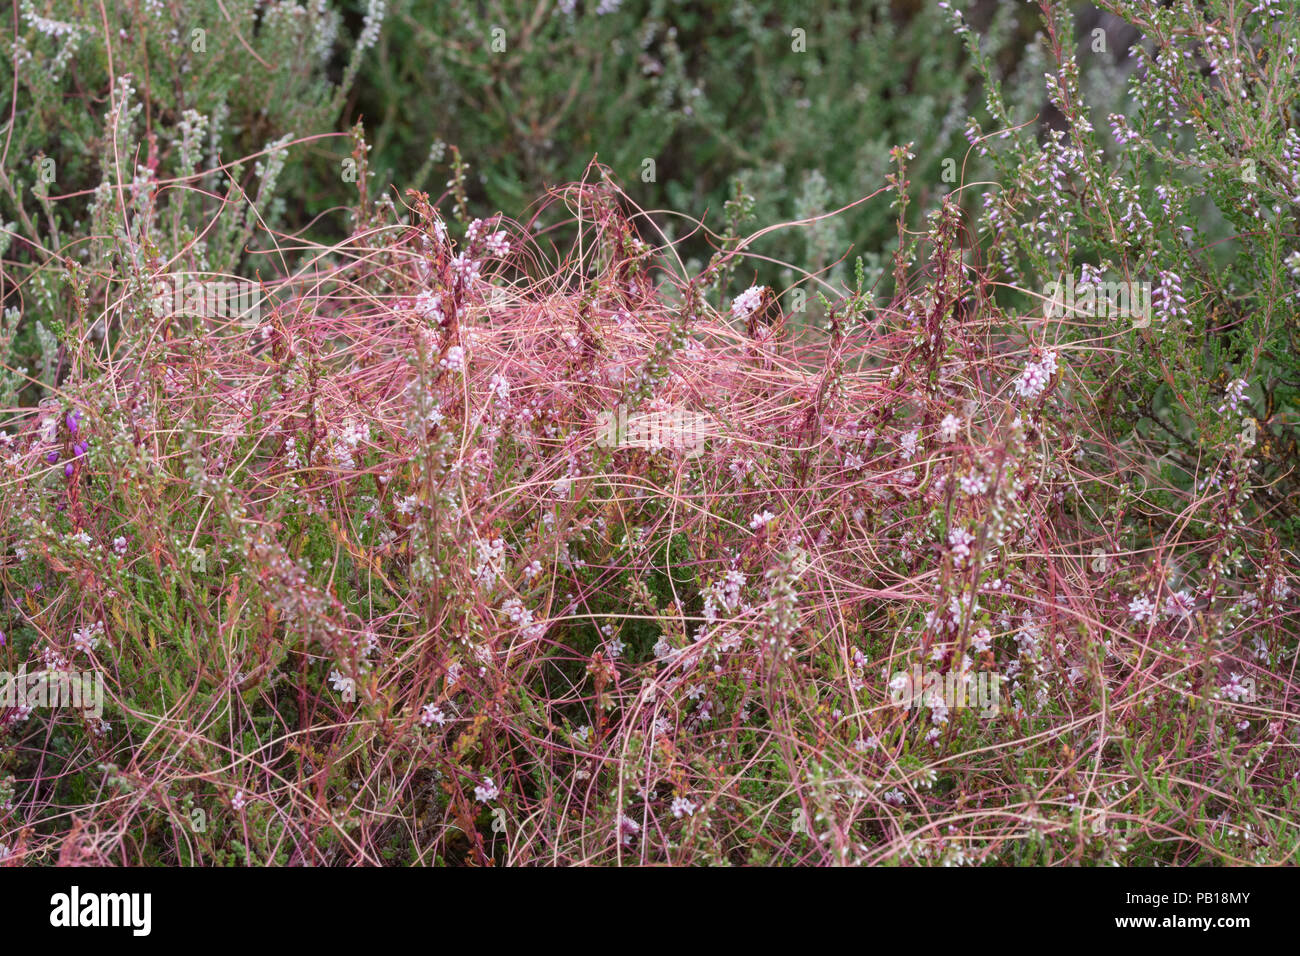 Cuscuta (dodder), a twining parasitic plant growing on ling heather in Surrey heathland, UK Stock Photo